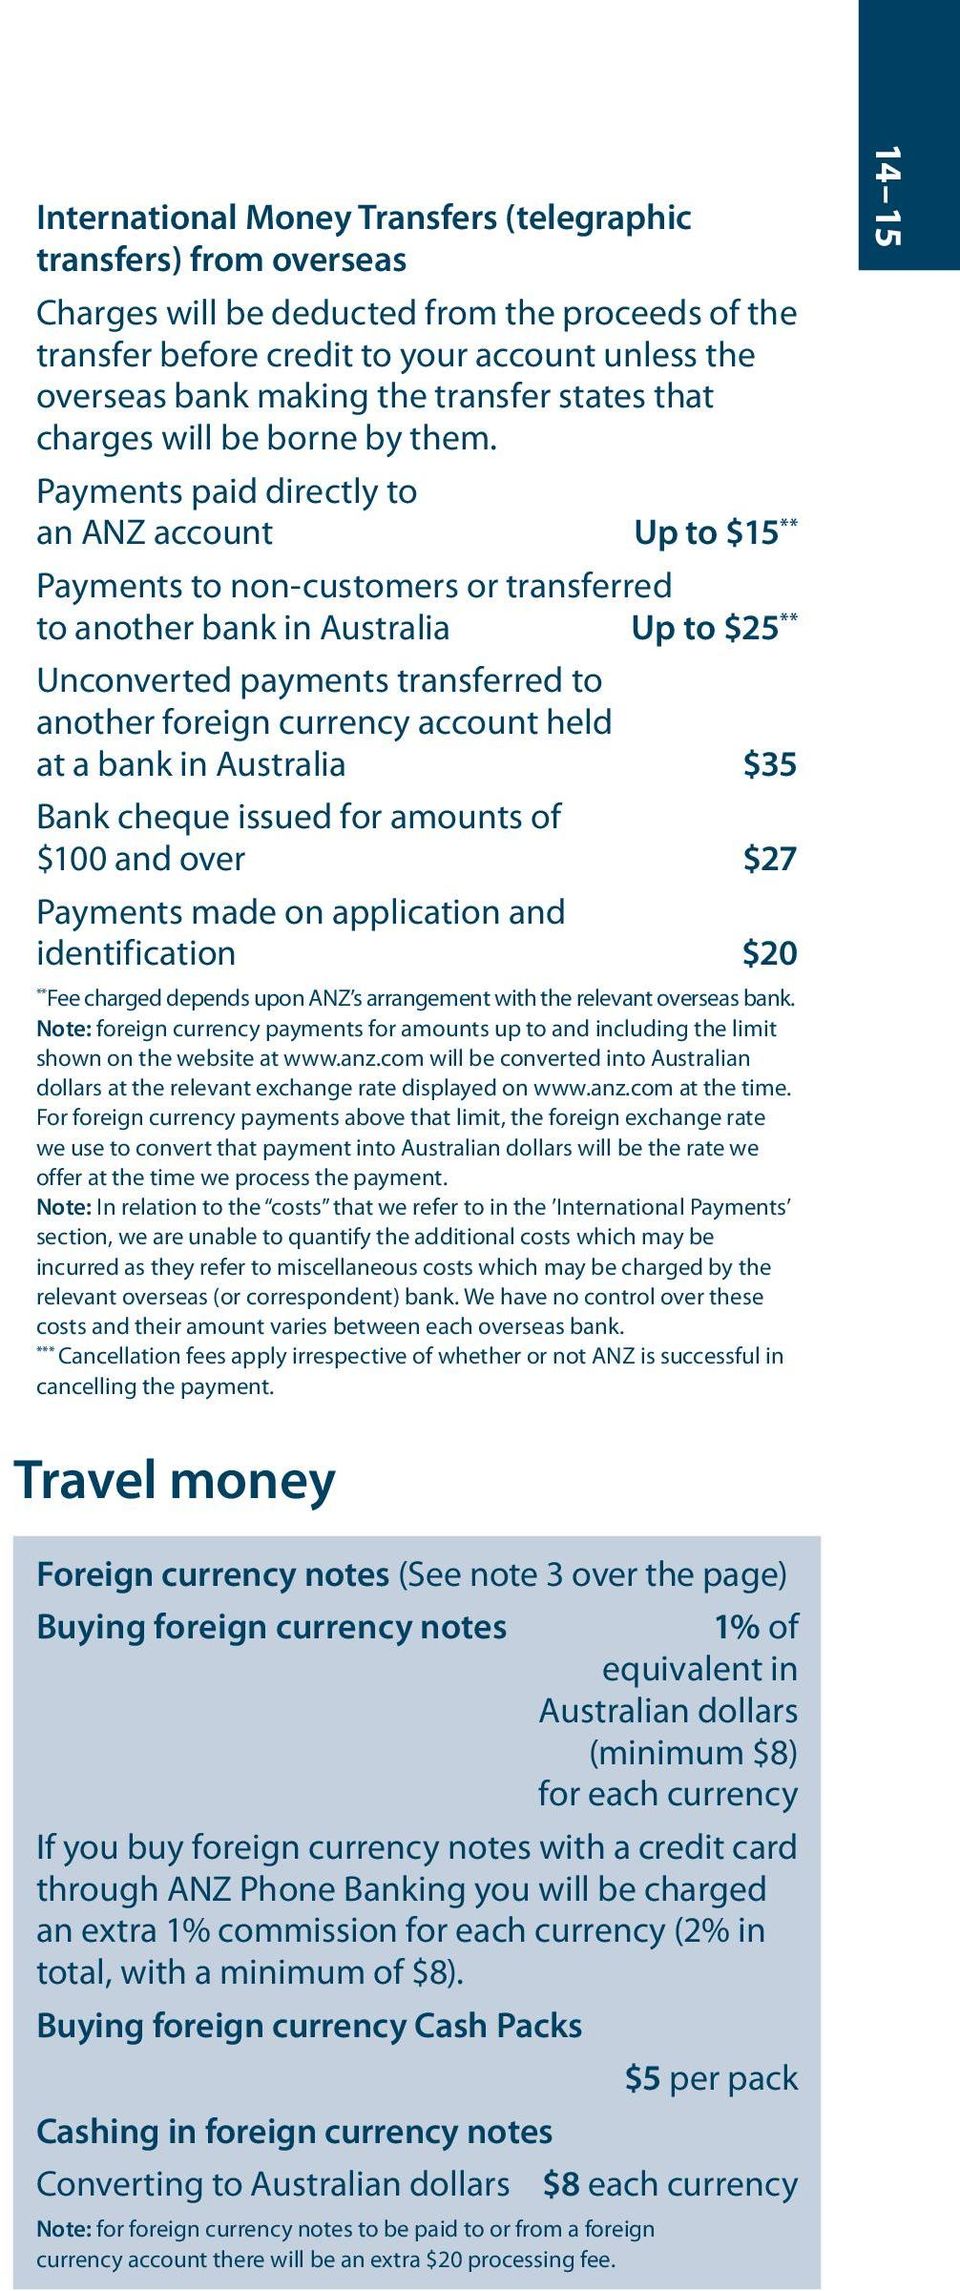 Payments paid directly to an ANZ account Up to $15 ** Payments to non-customers or transferred to another bank in Australia Up to $25 ** Unconverted payments transferred to another foreign currency